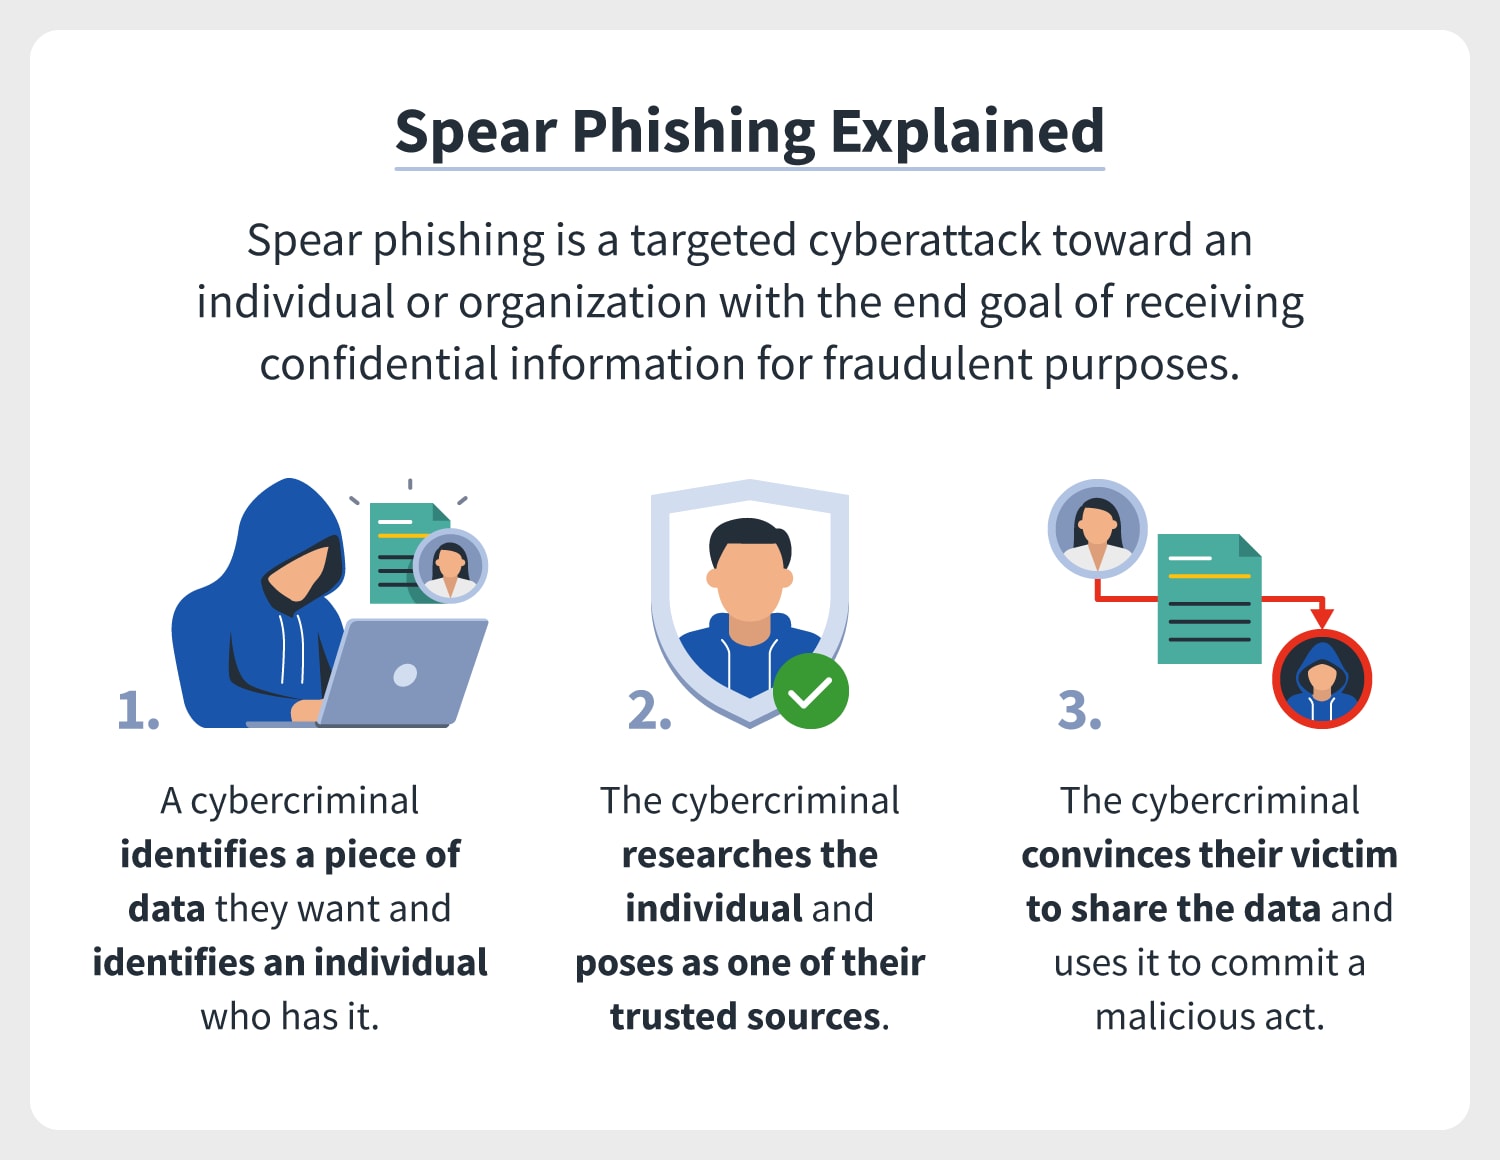 a spear phishing definition overviews the meaning of this cyber attack and how it works